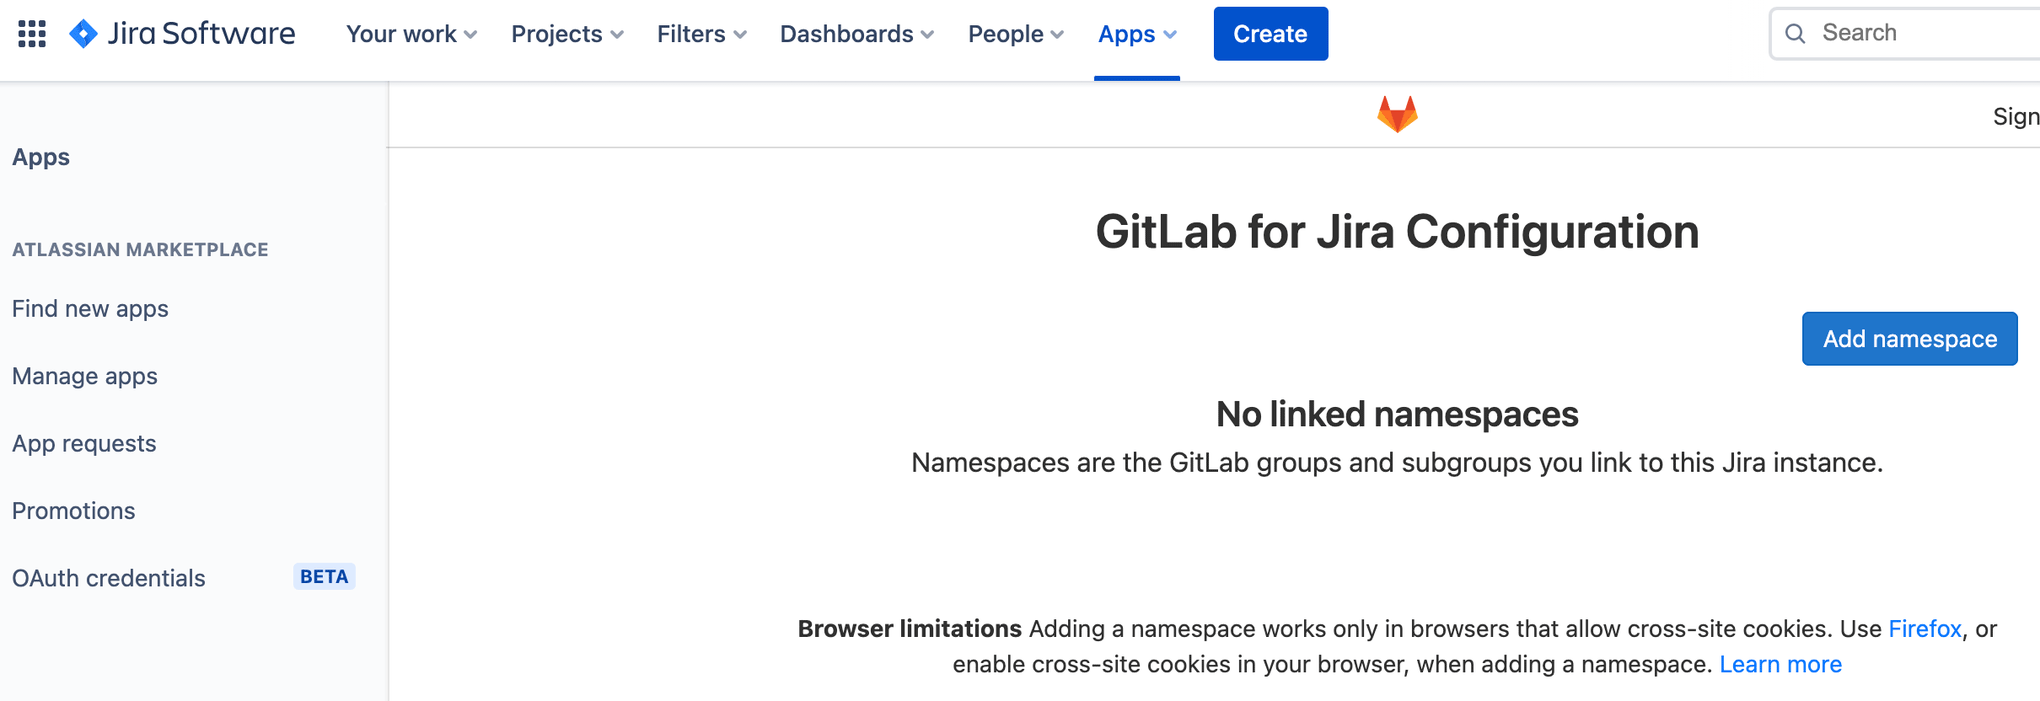 Screen to add a namespace to your Gitlab Jira software configuration